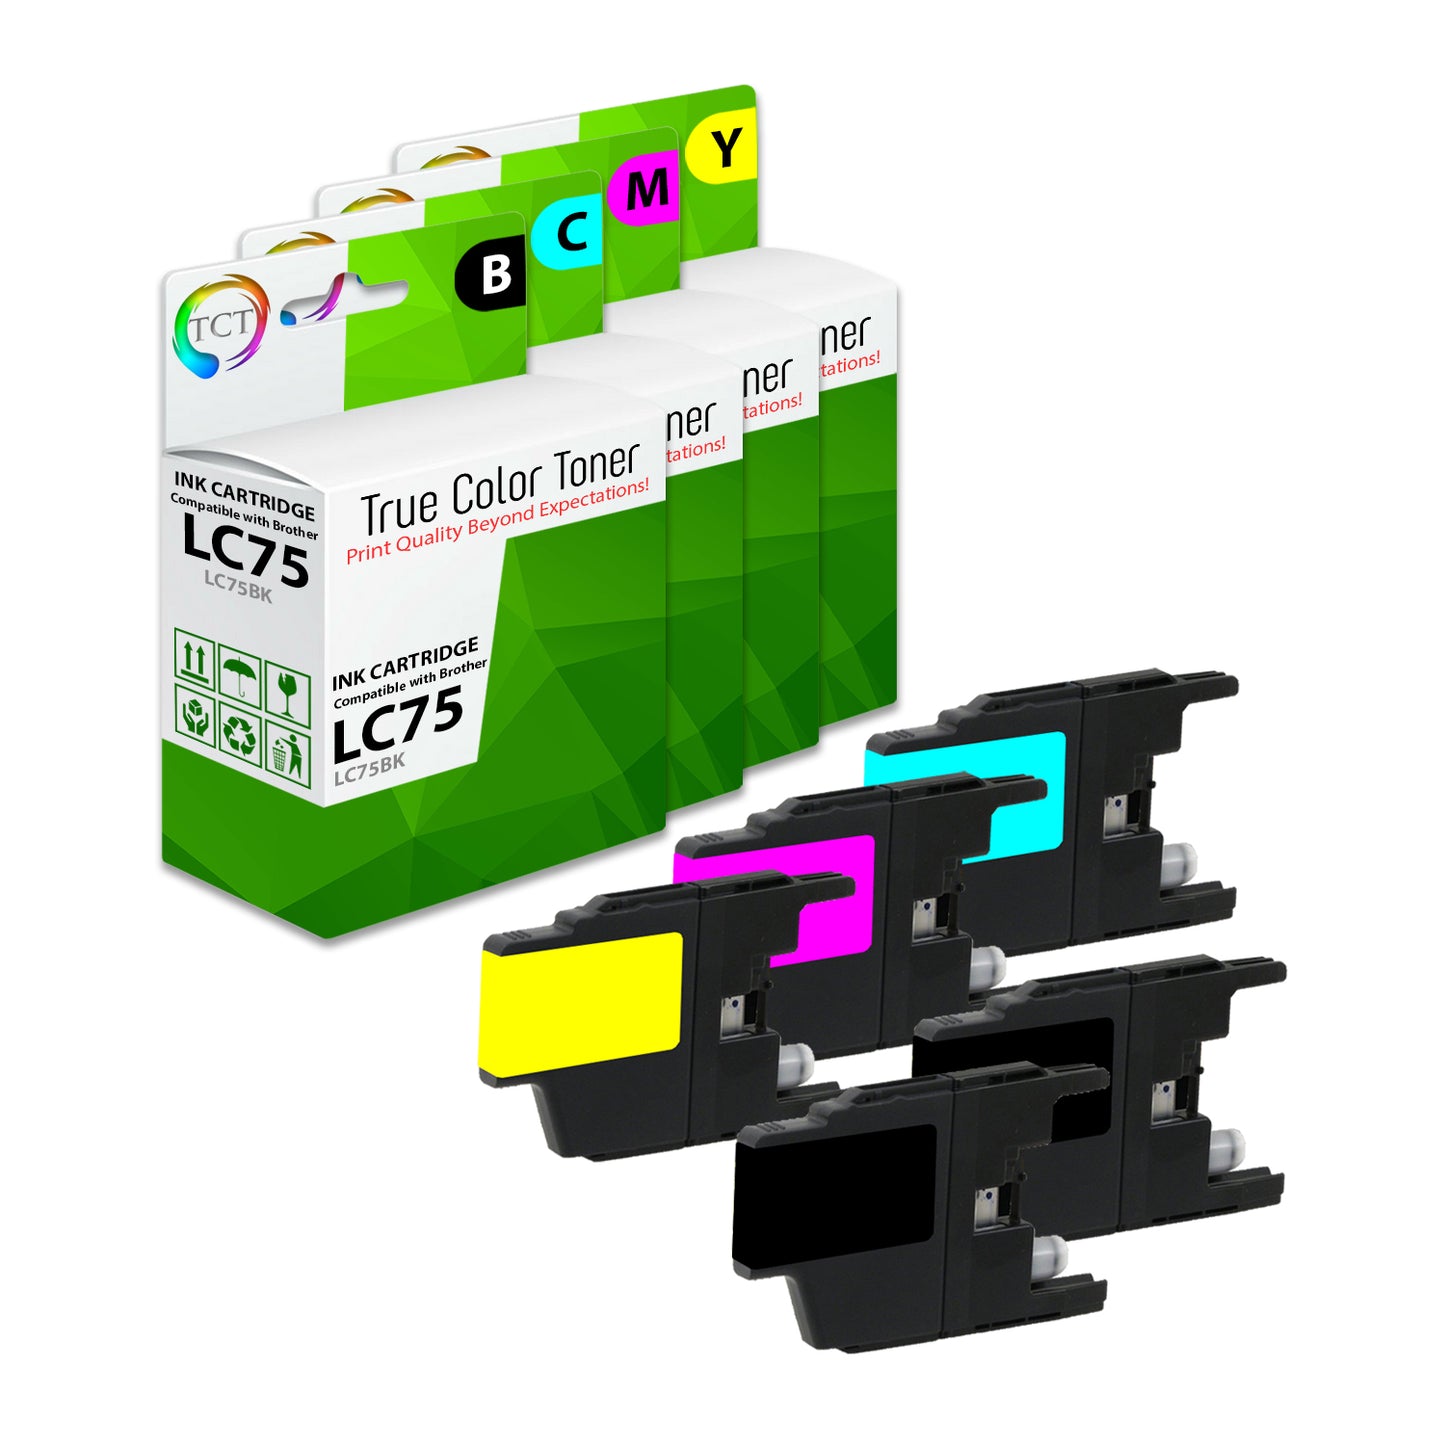 TCT Compatible Ink Cartridge Replacement for the Brother LC75 Series - 5 Pack (B, C, M, Y)